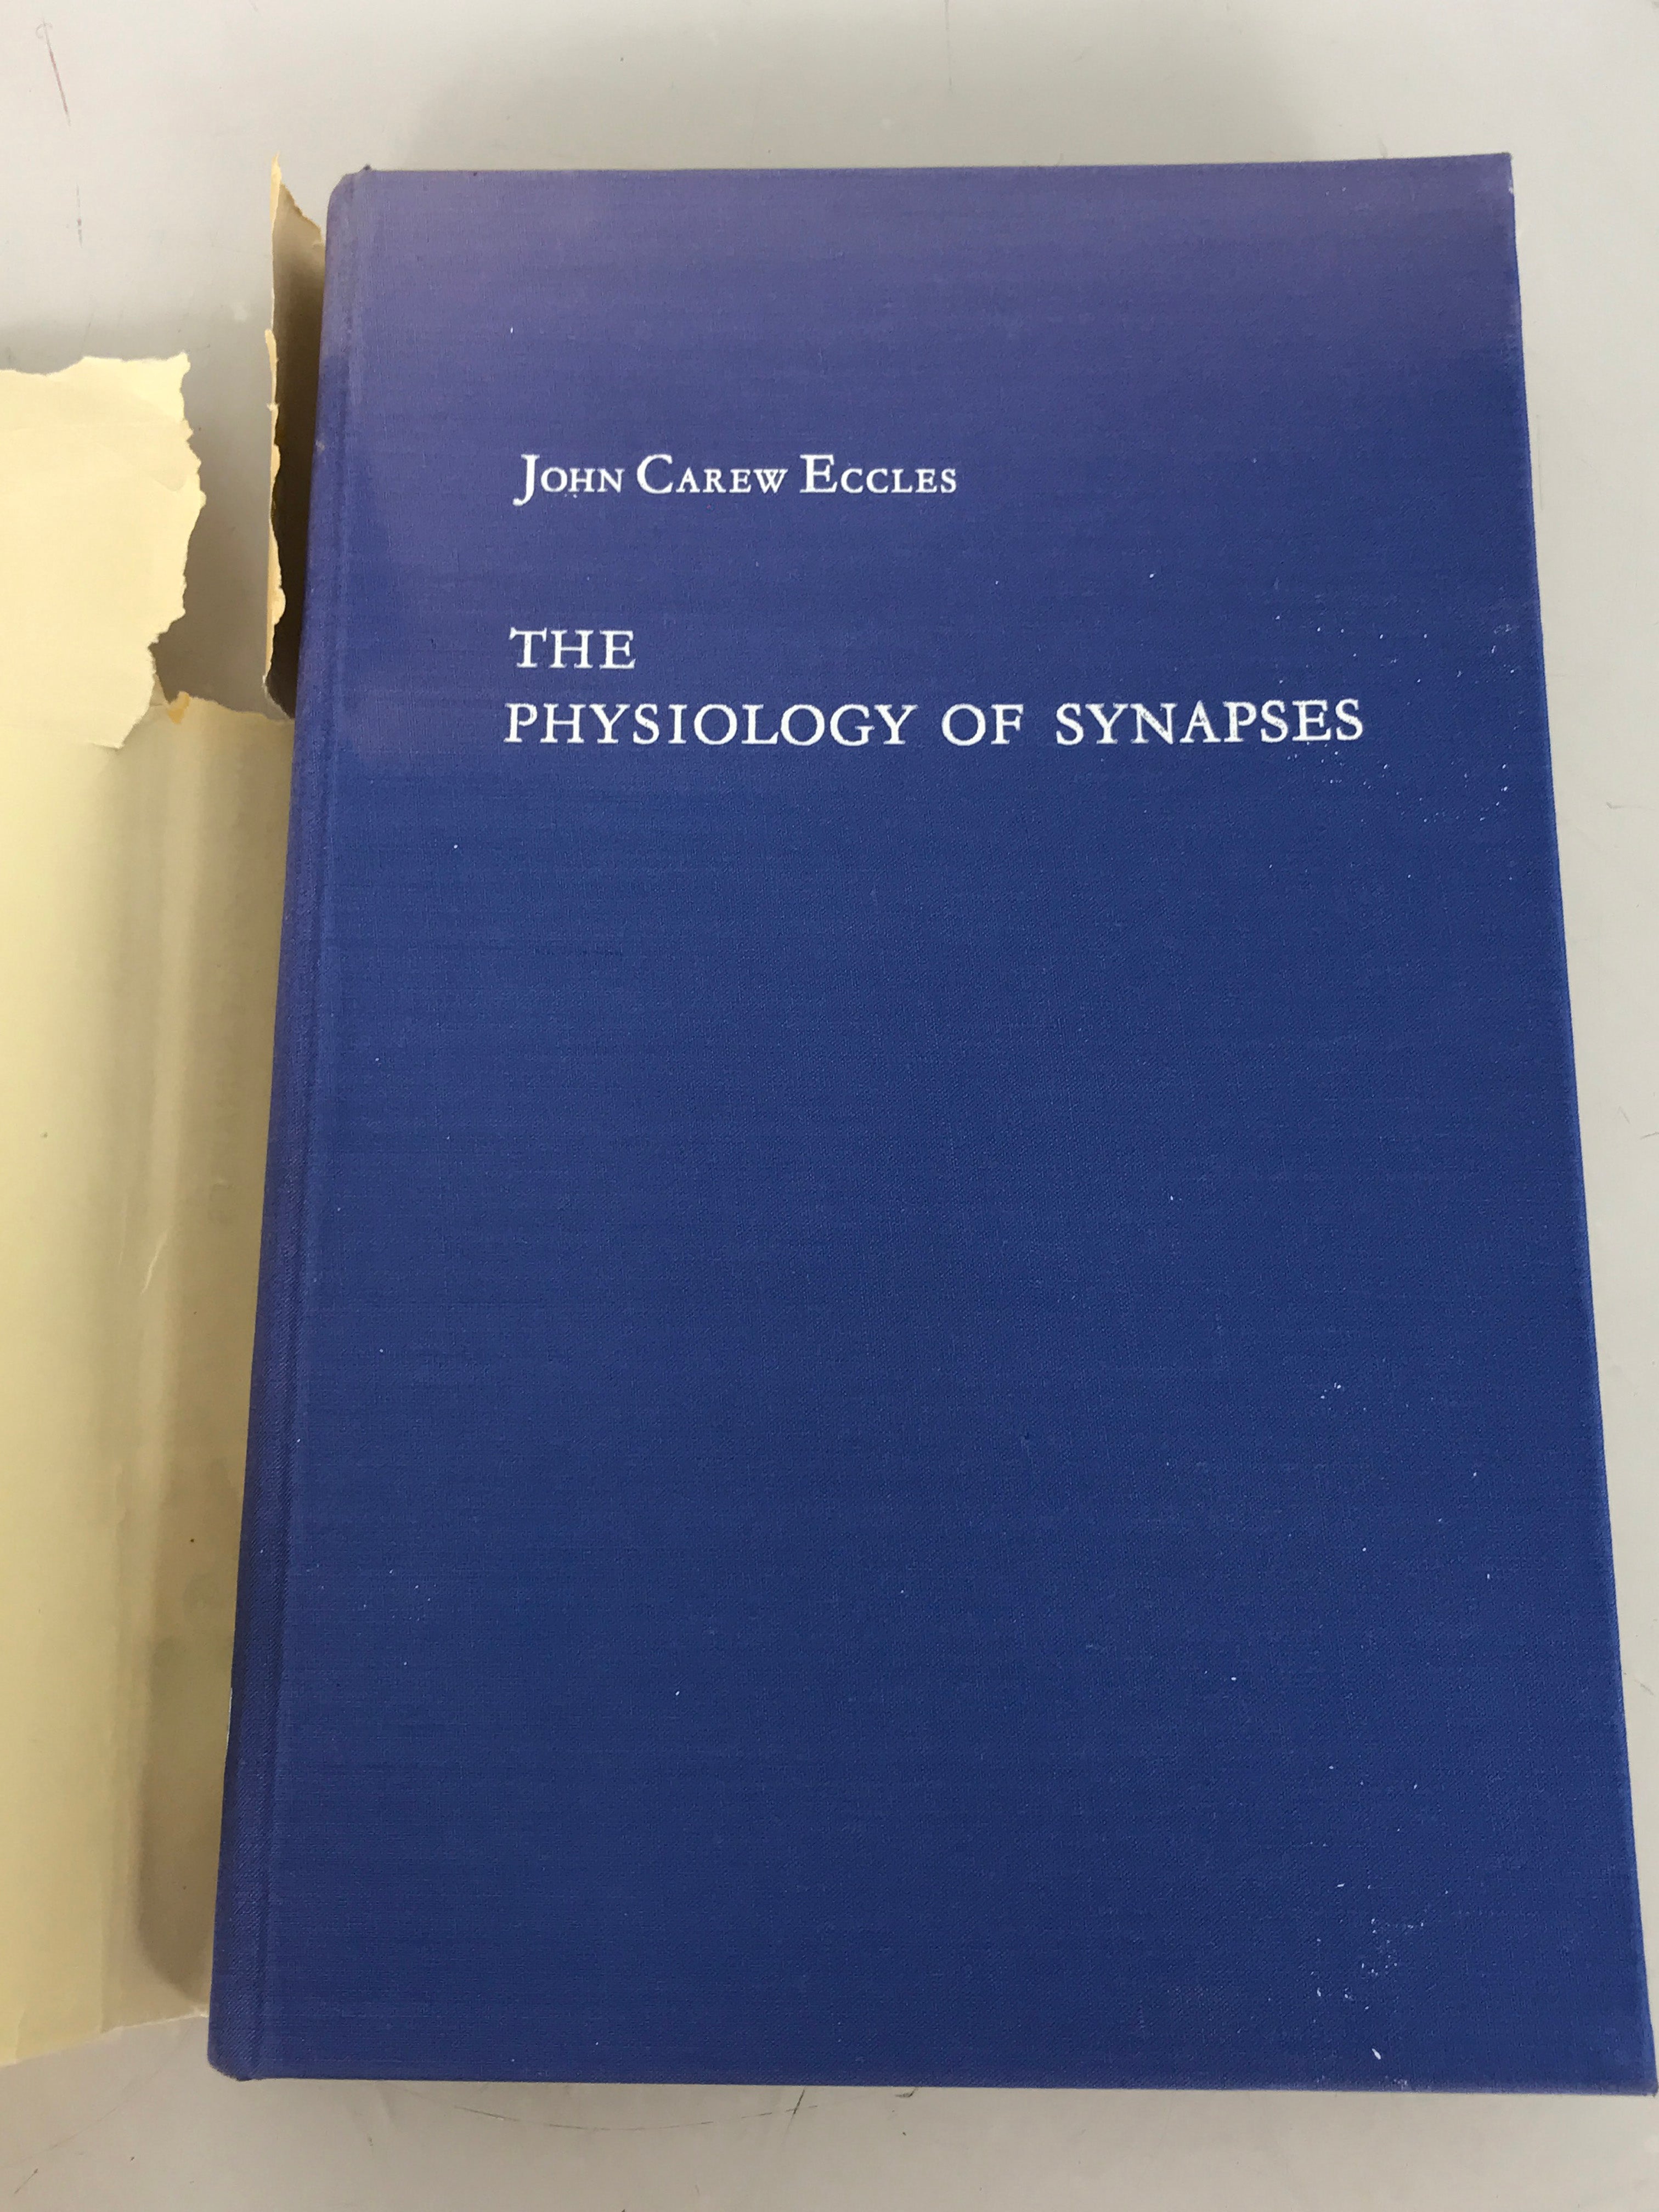 Lot of 2 Physiology of Synapses Books 1964-1969 HC DJ